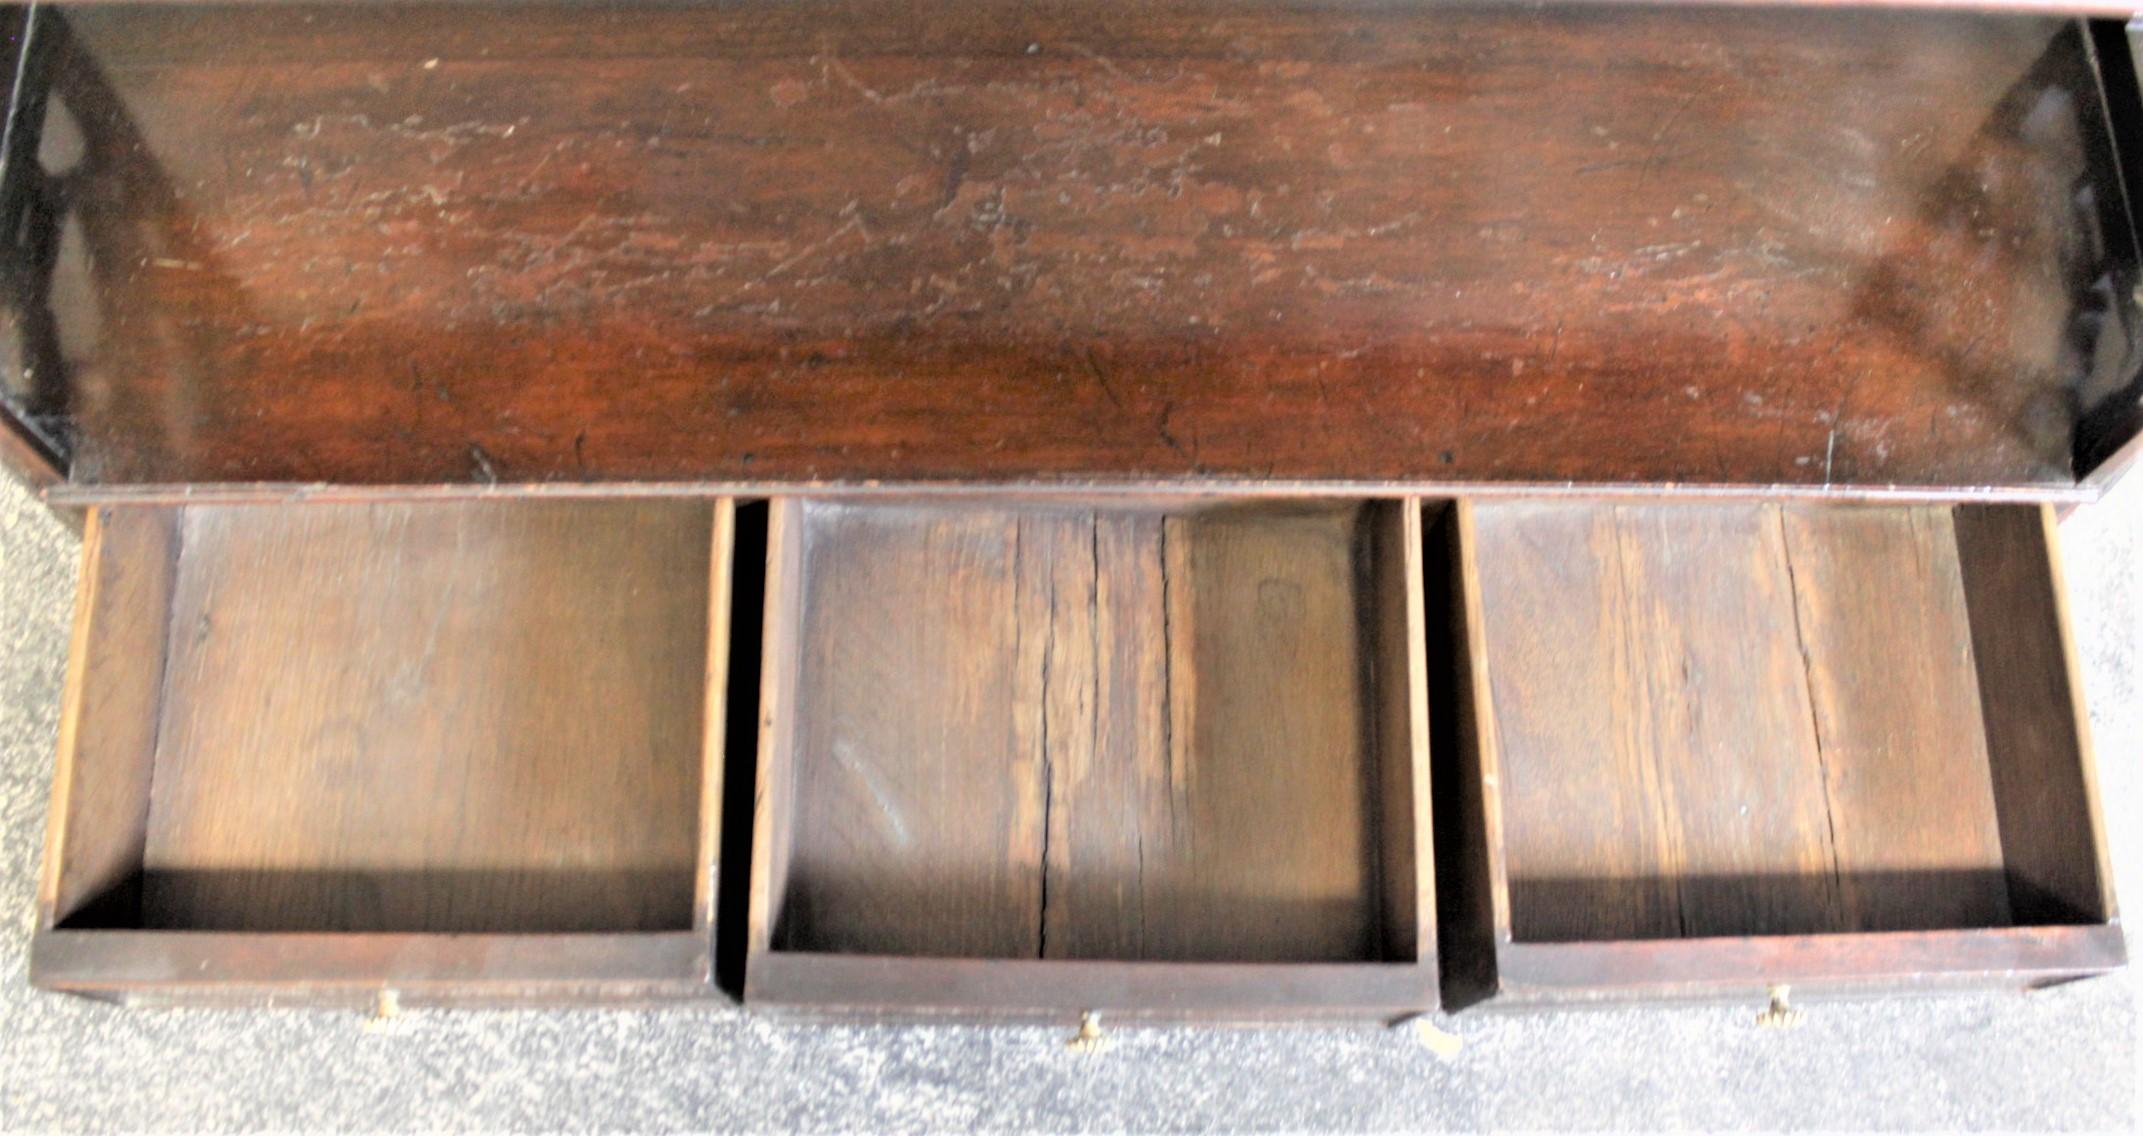 18th Century Antique Wooden Chinese Chippendale Wall Shelf or Hanging Bookshelf with Drawers